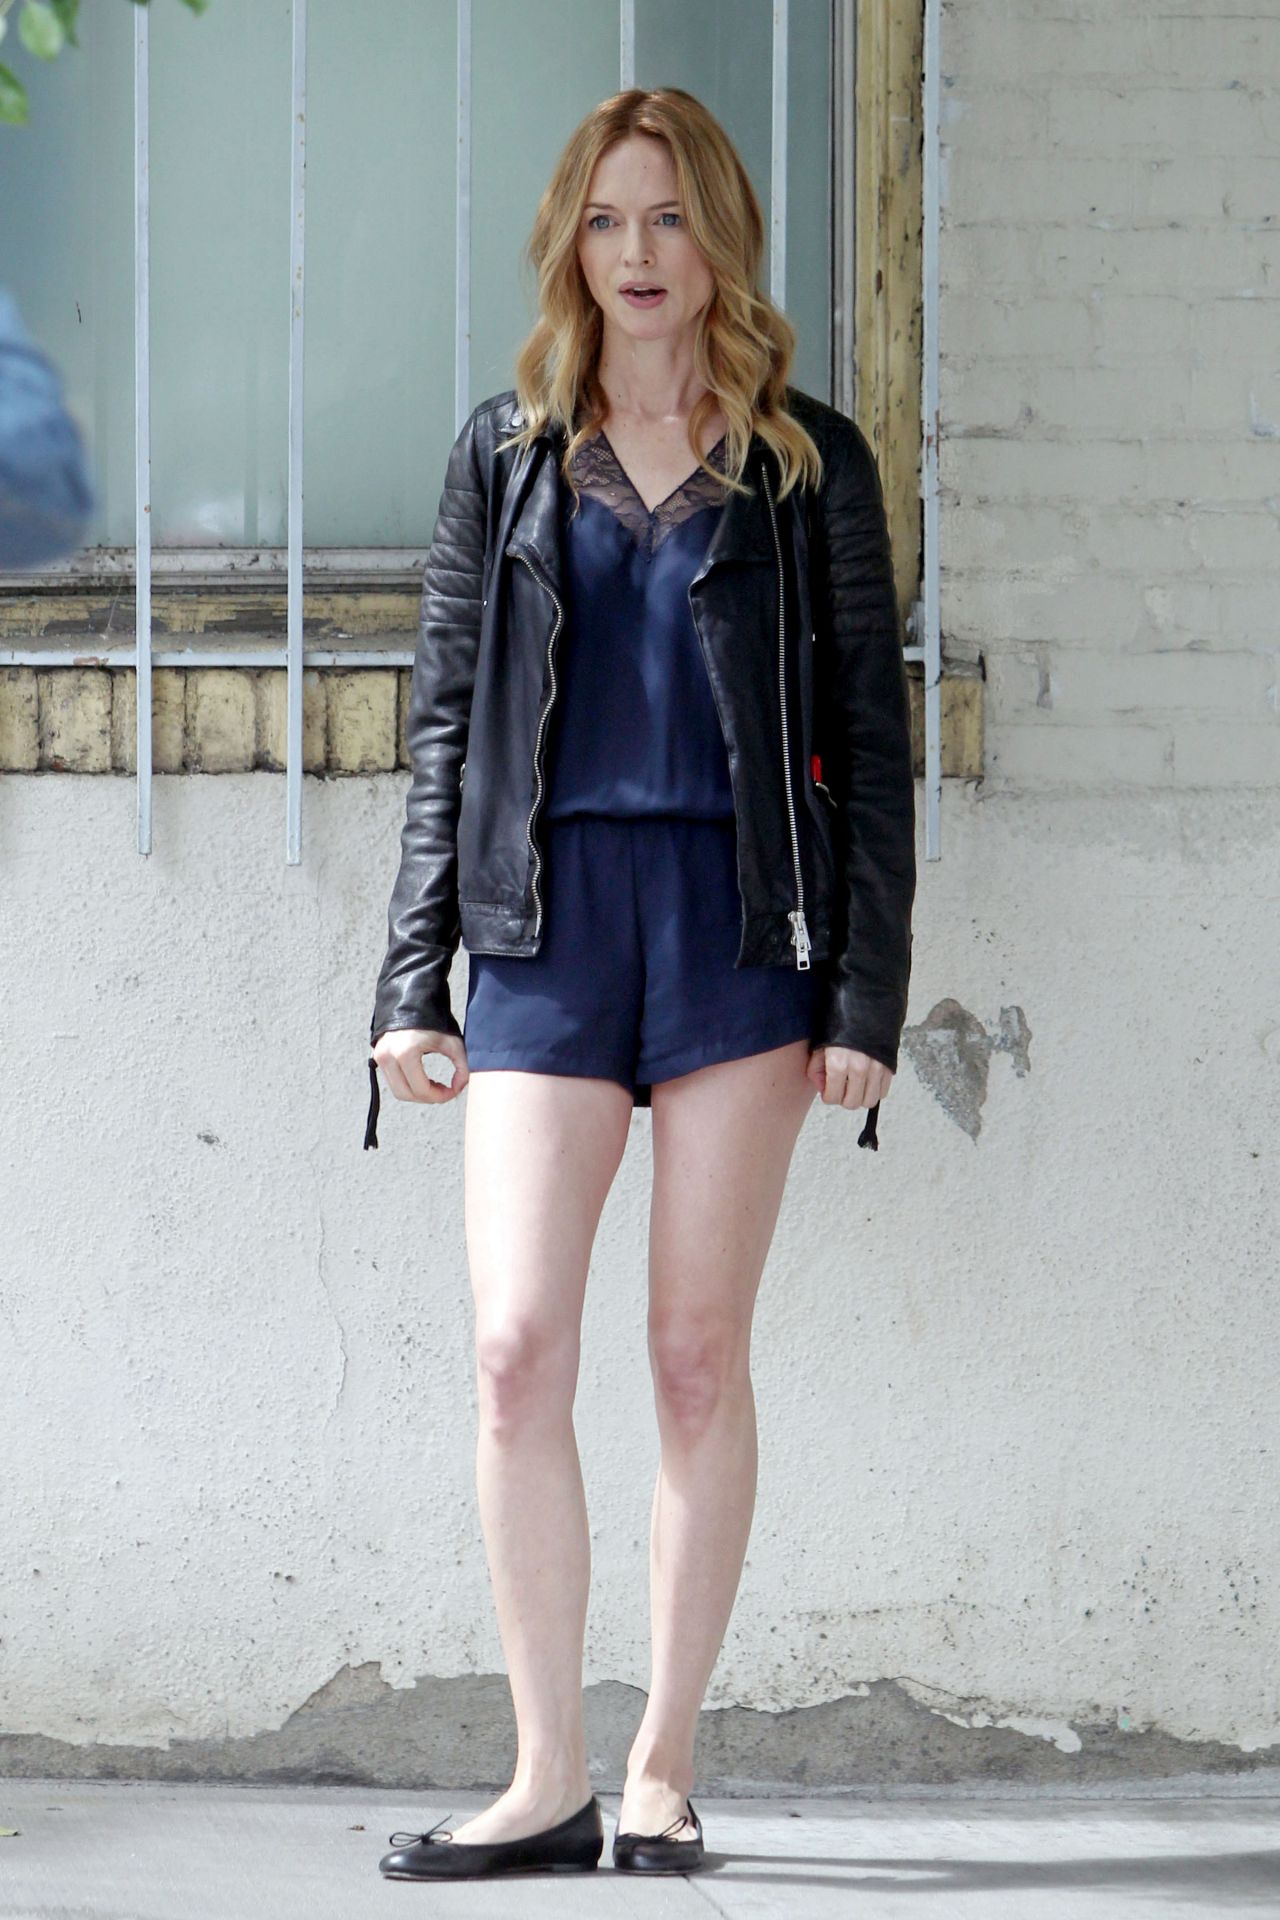 Heather Graham - on the set of 'Half Magic' in Los Angeles, June 2015